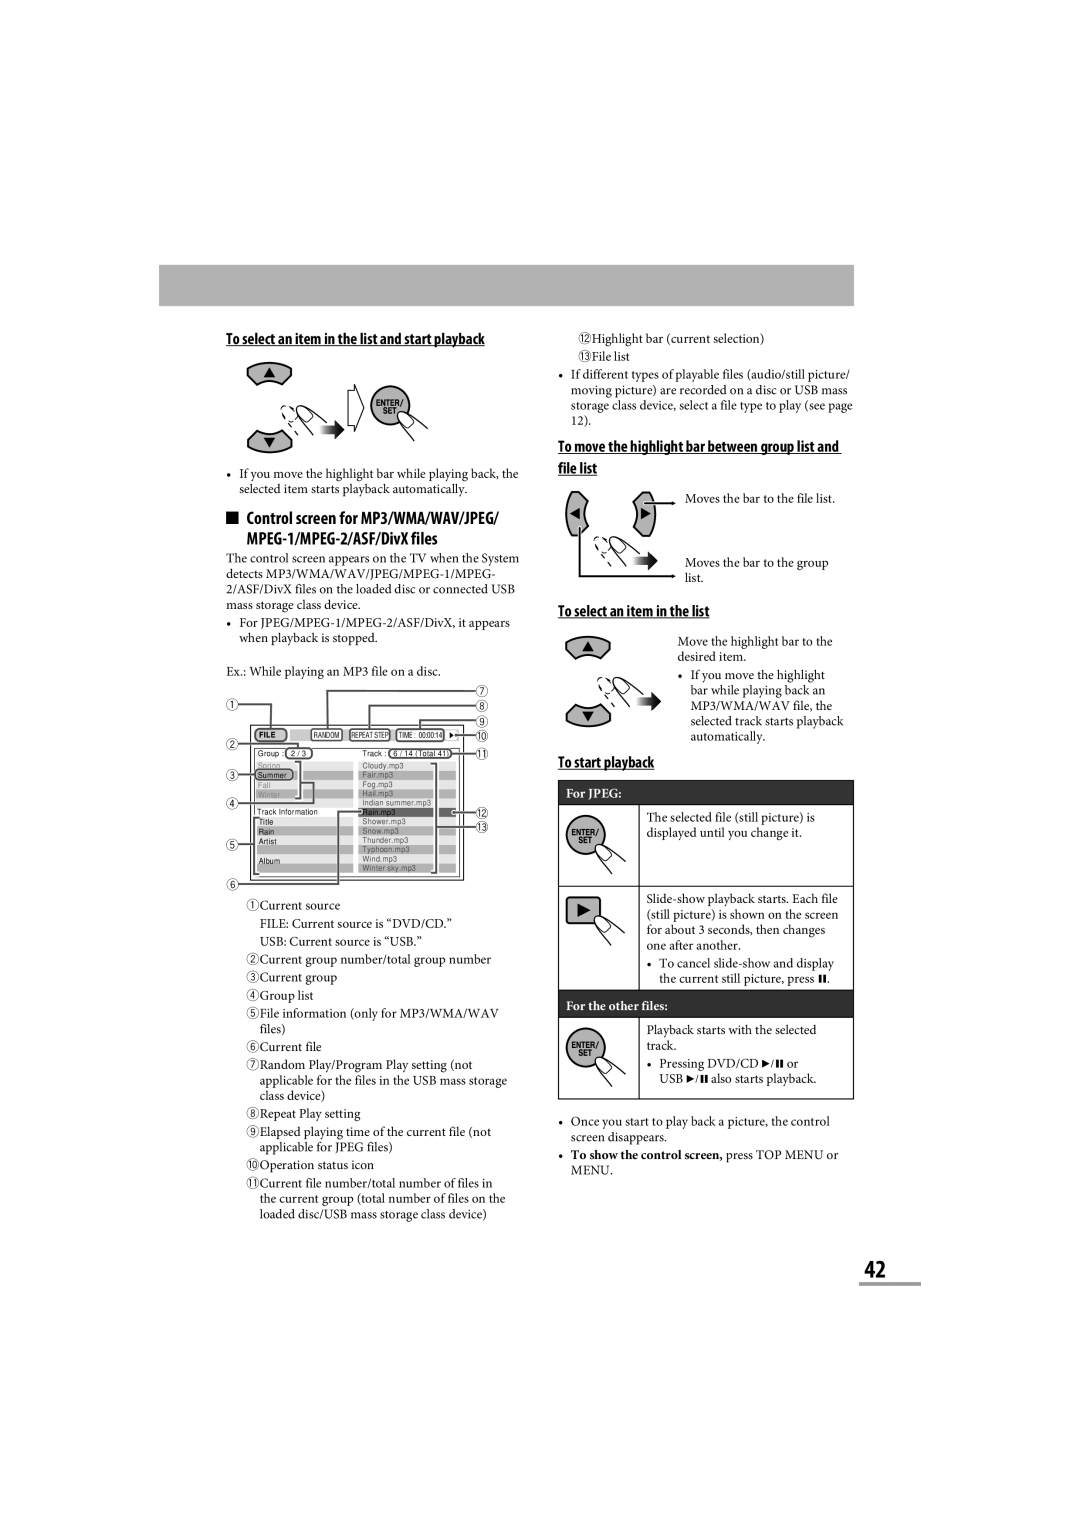 JVC CA-NXG9 manual To select an item in the list, To start playback, Ex. While playing an MP3 file on a disc, For JPEG 